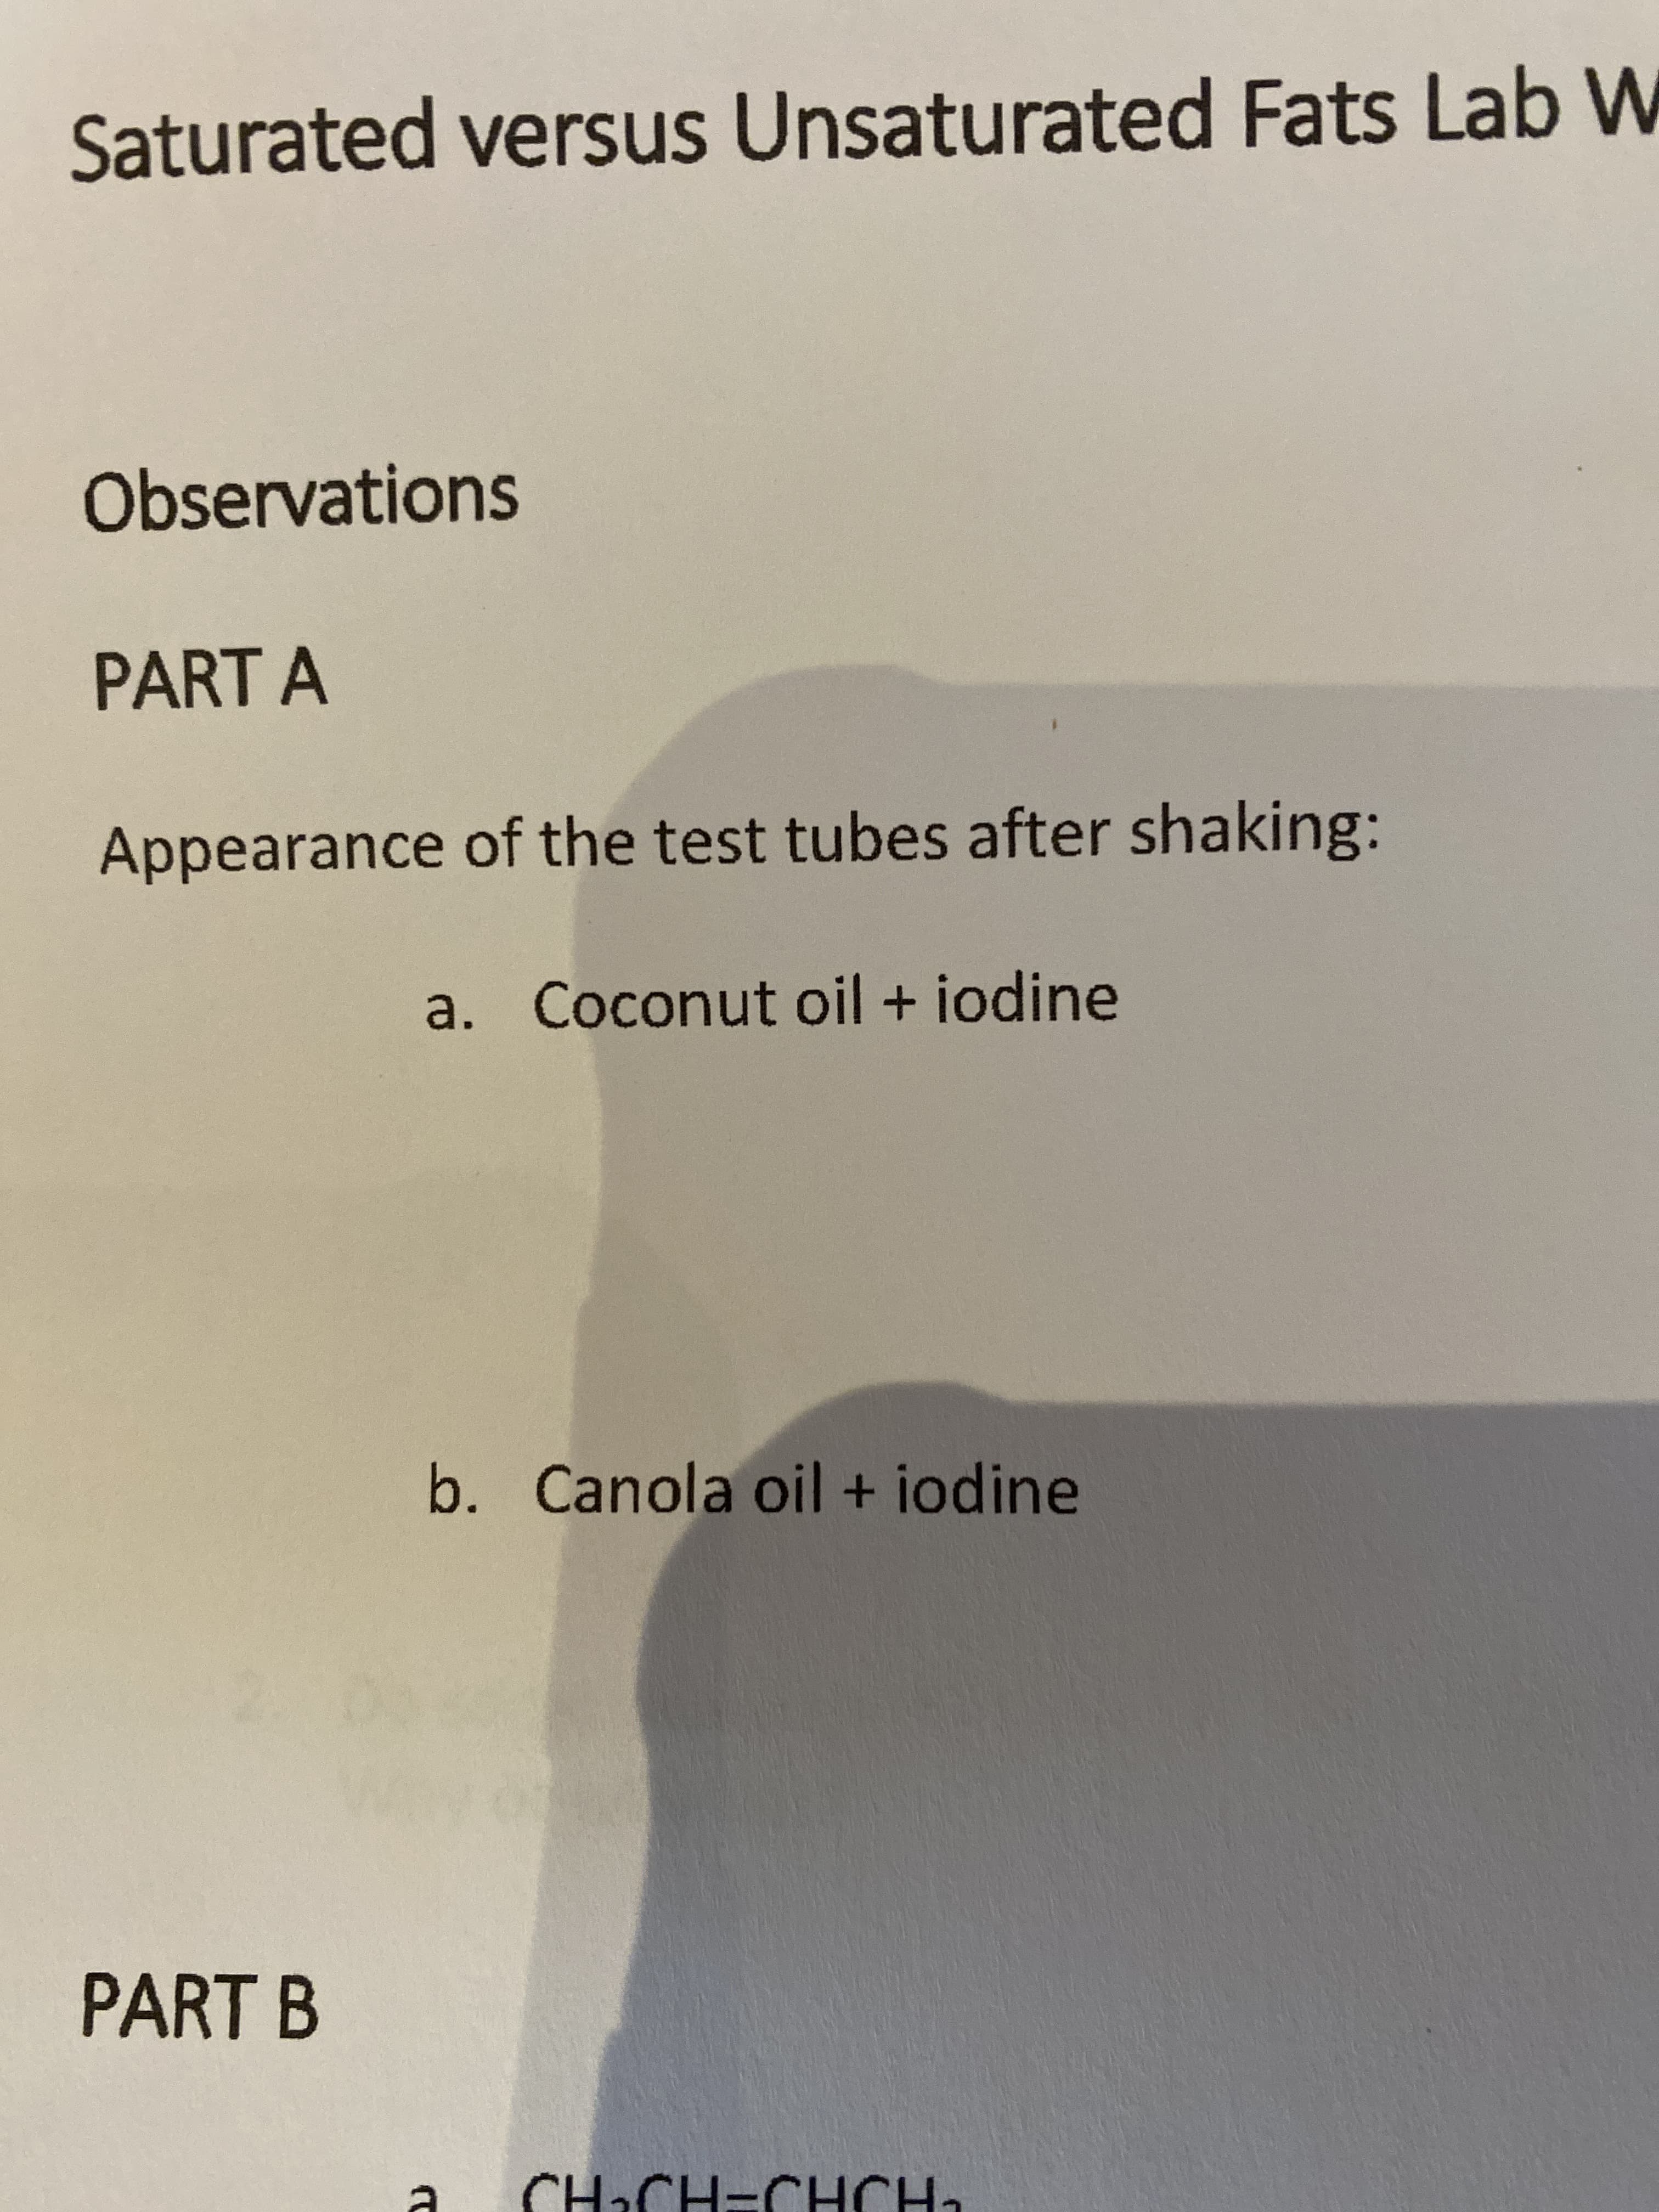 Appearance of the test tubes after shaking:
a. Coconut oil + iodine
b. Canola oil + iodine
